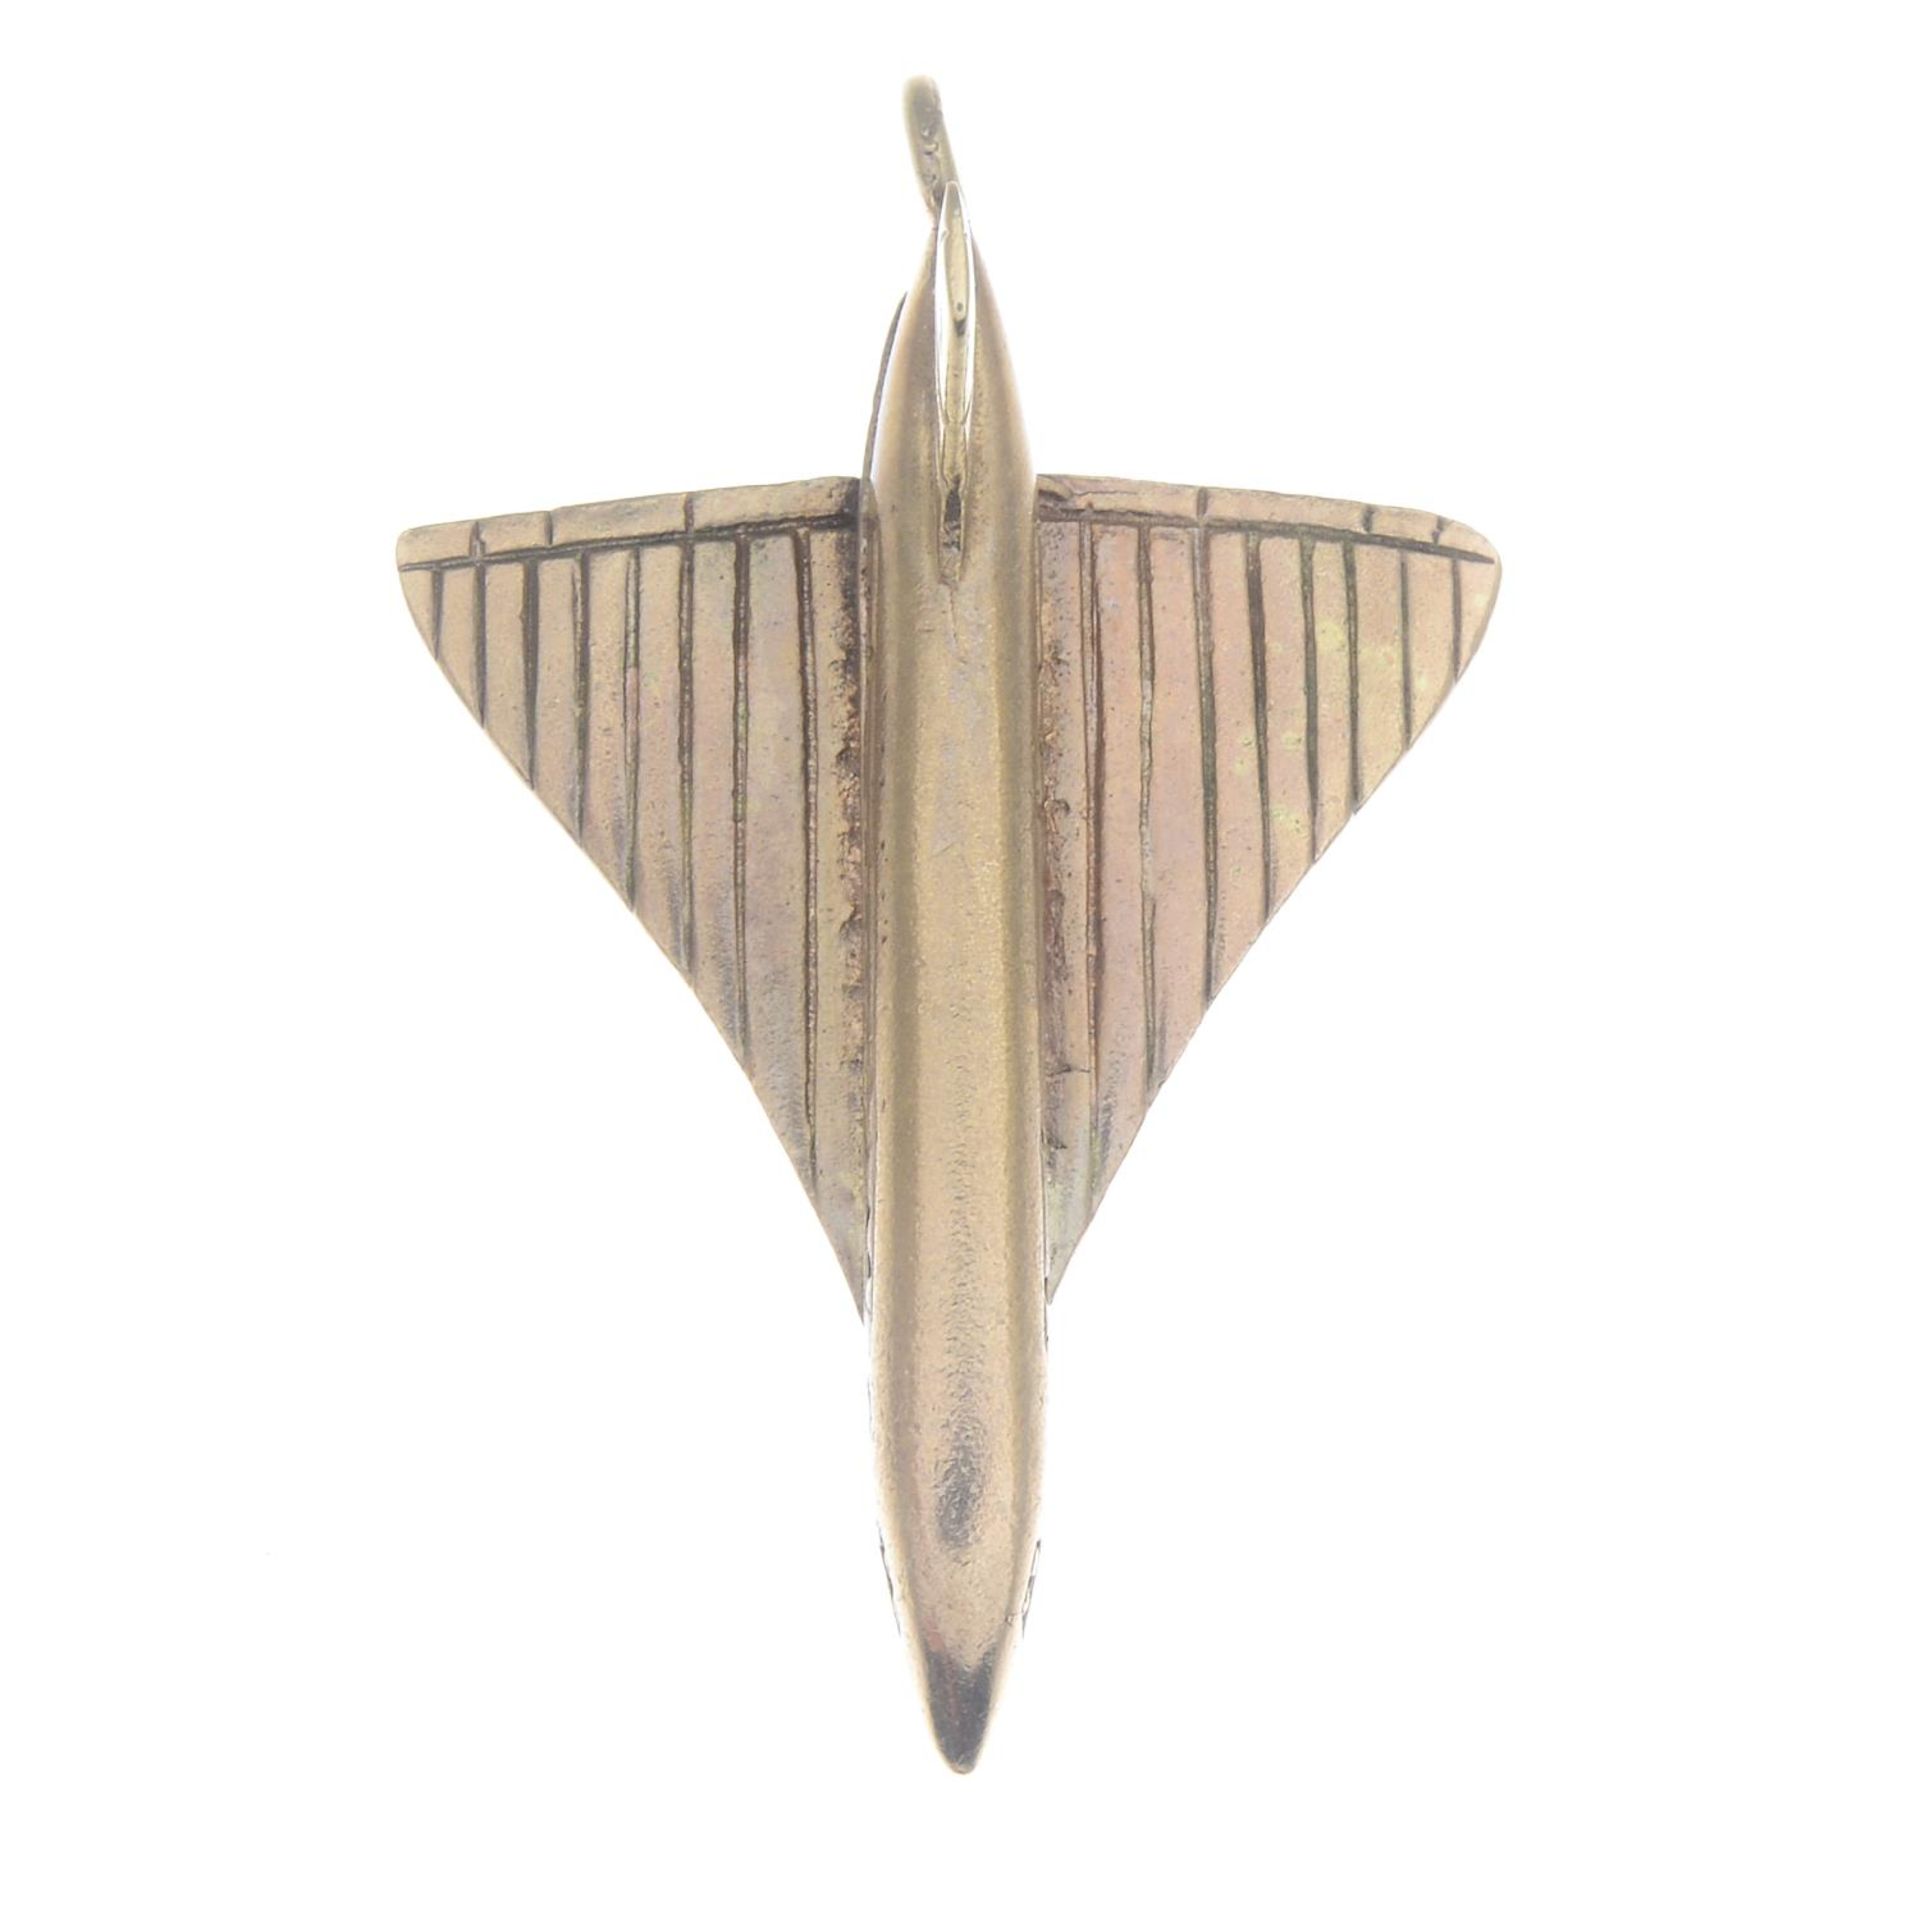 A 9ct gold hinged plane charm, modelled as Concord.Hallmarks for London, 1969.